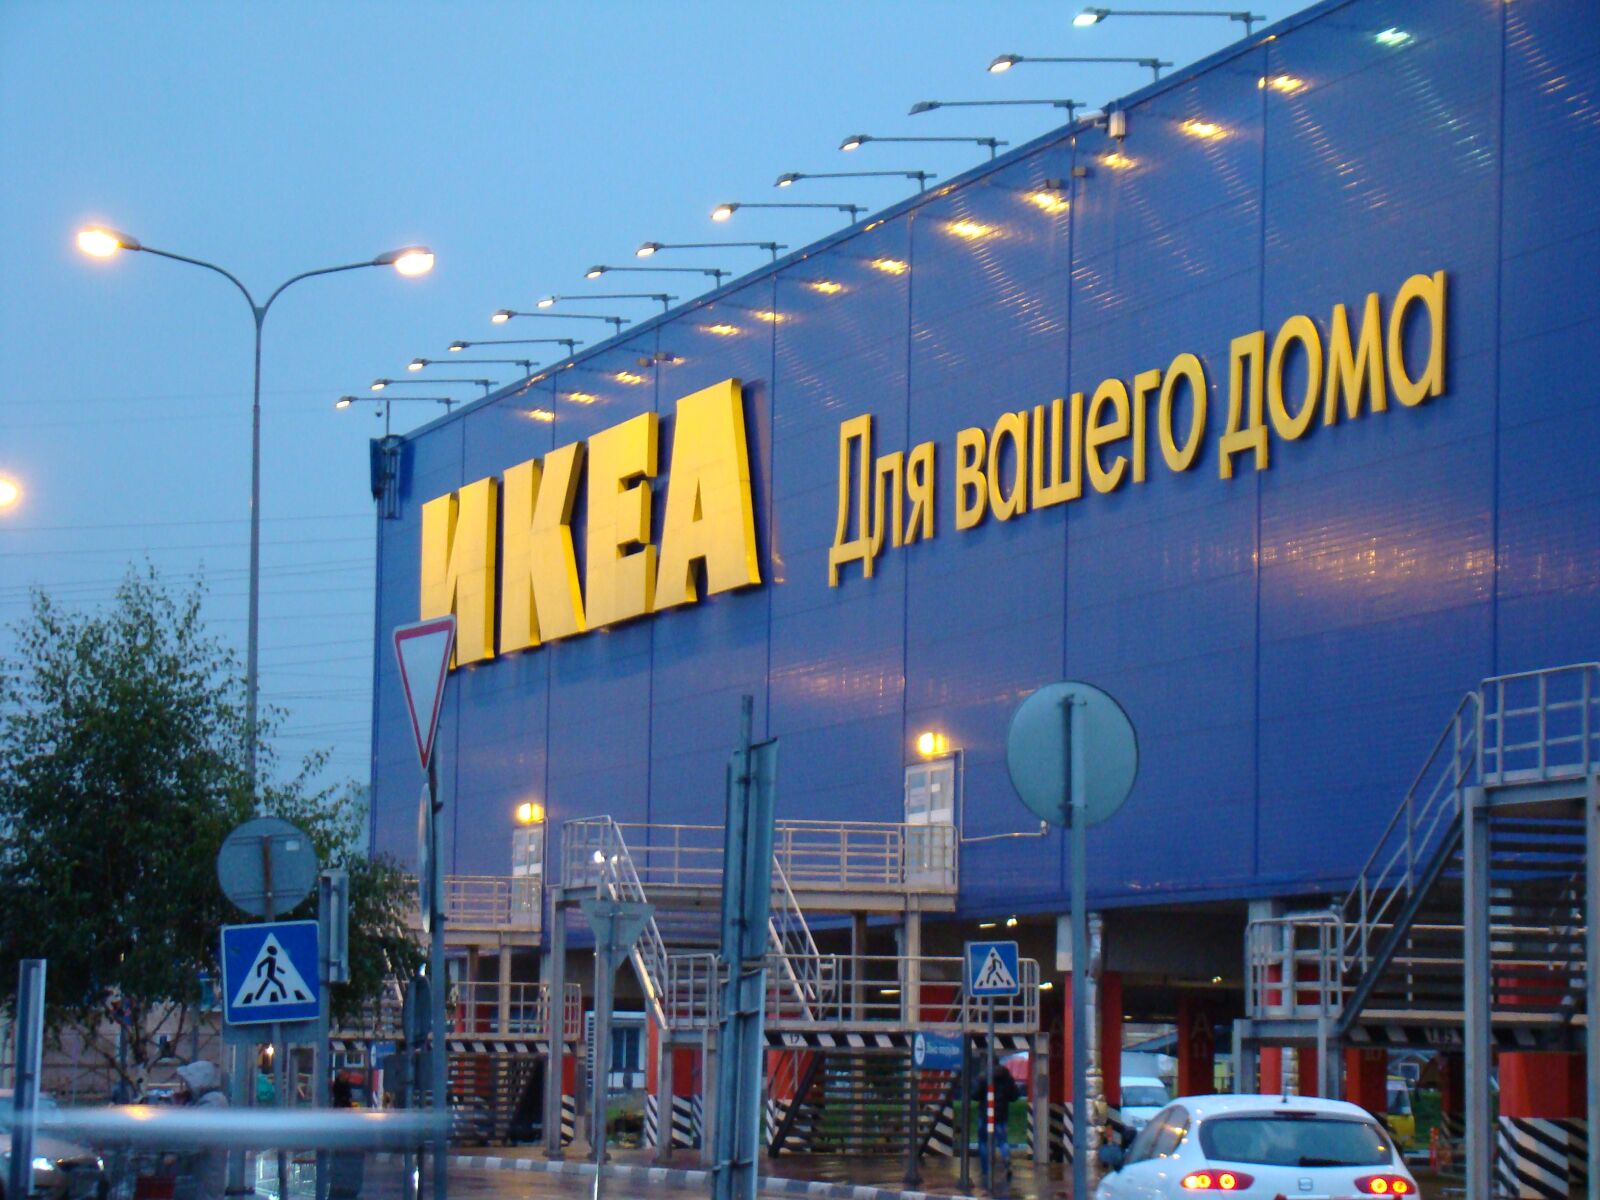 Sony DSC-H9 sample photo. Moscow, russia, ikea photography